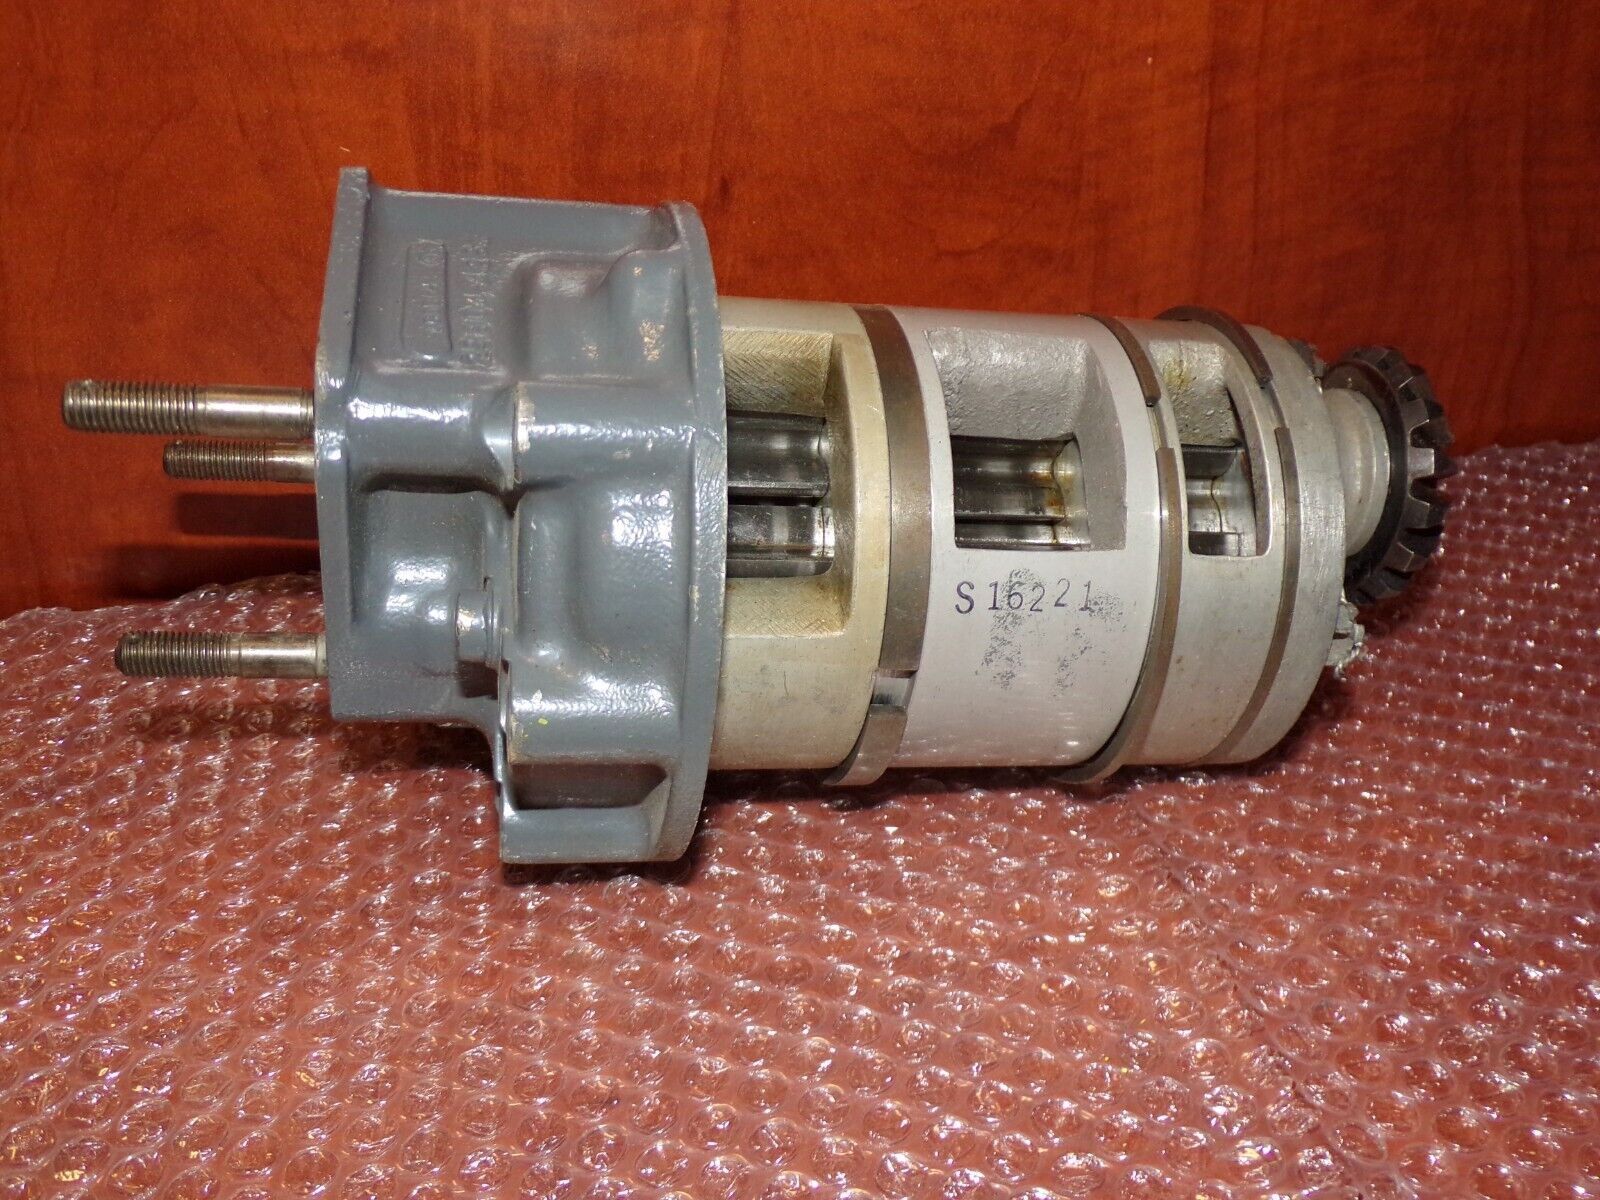 S-16221 Aircraft Gear Assy and Housing 29804-4282